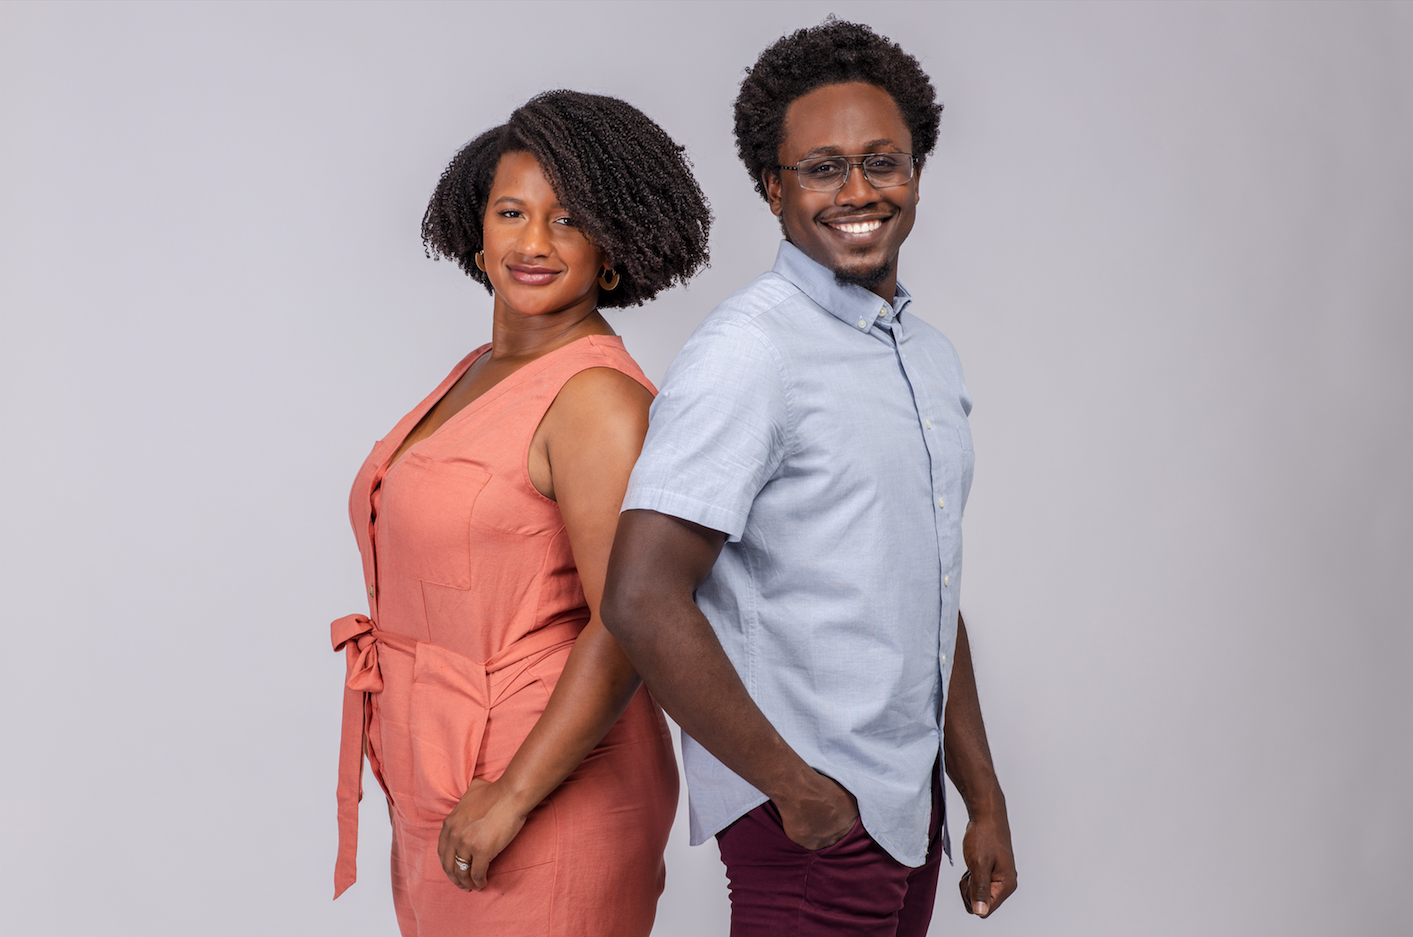 CurlMix Founders Who Rejected $400K 'Shark Tank' Offer Just Raised Over $3.6M In Equity CF